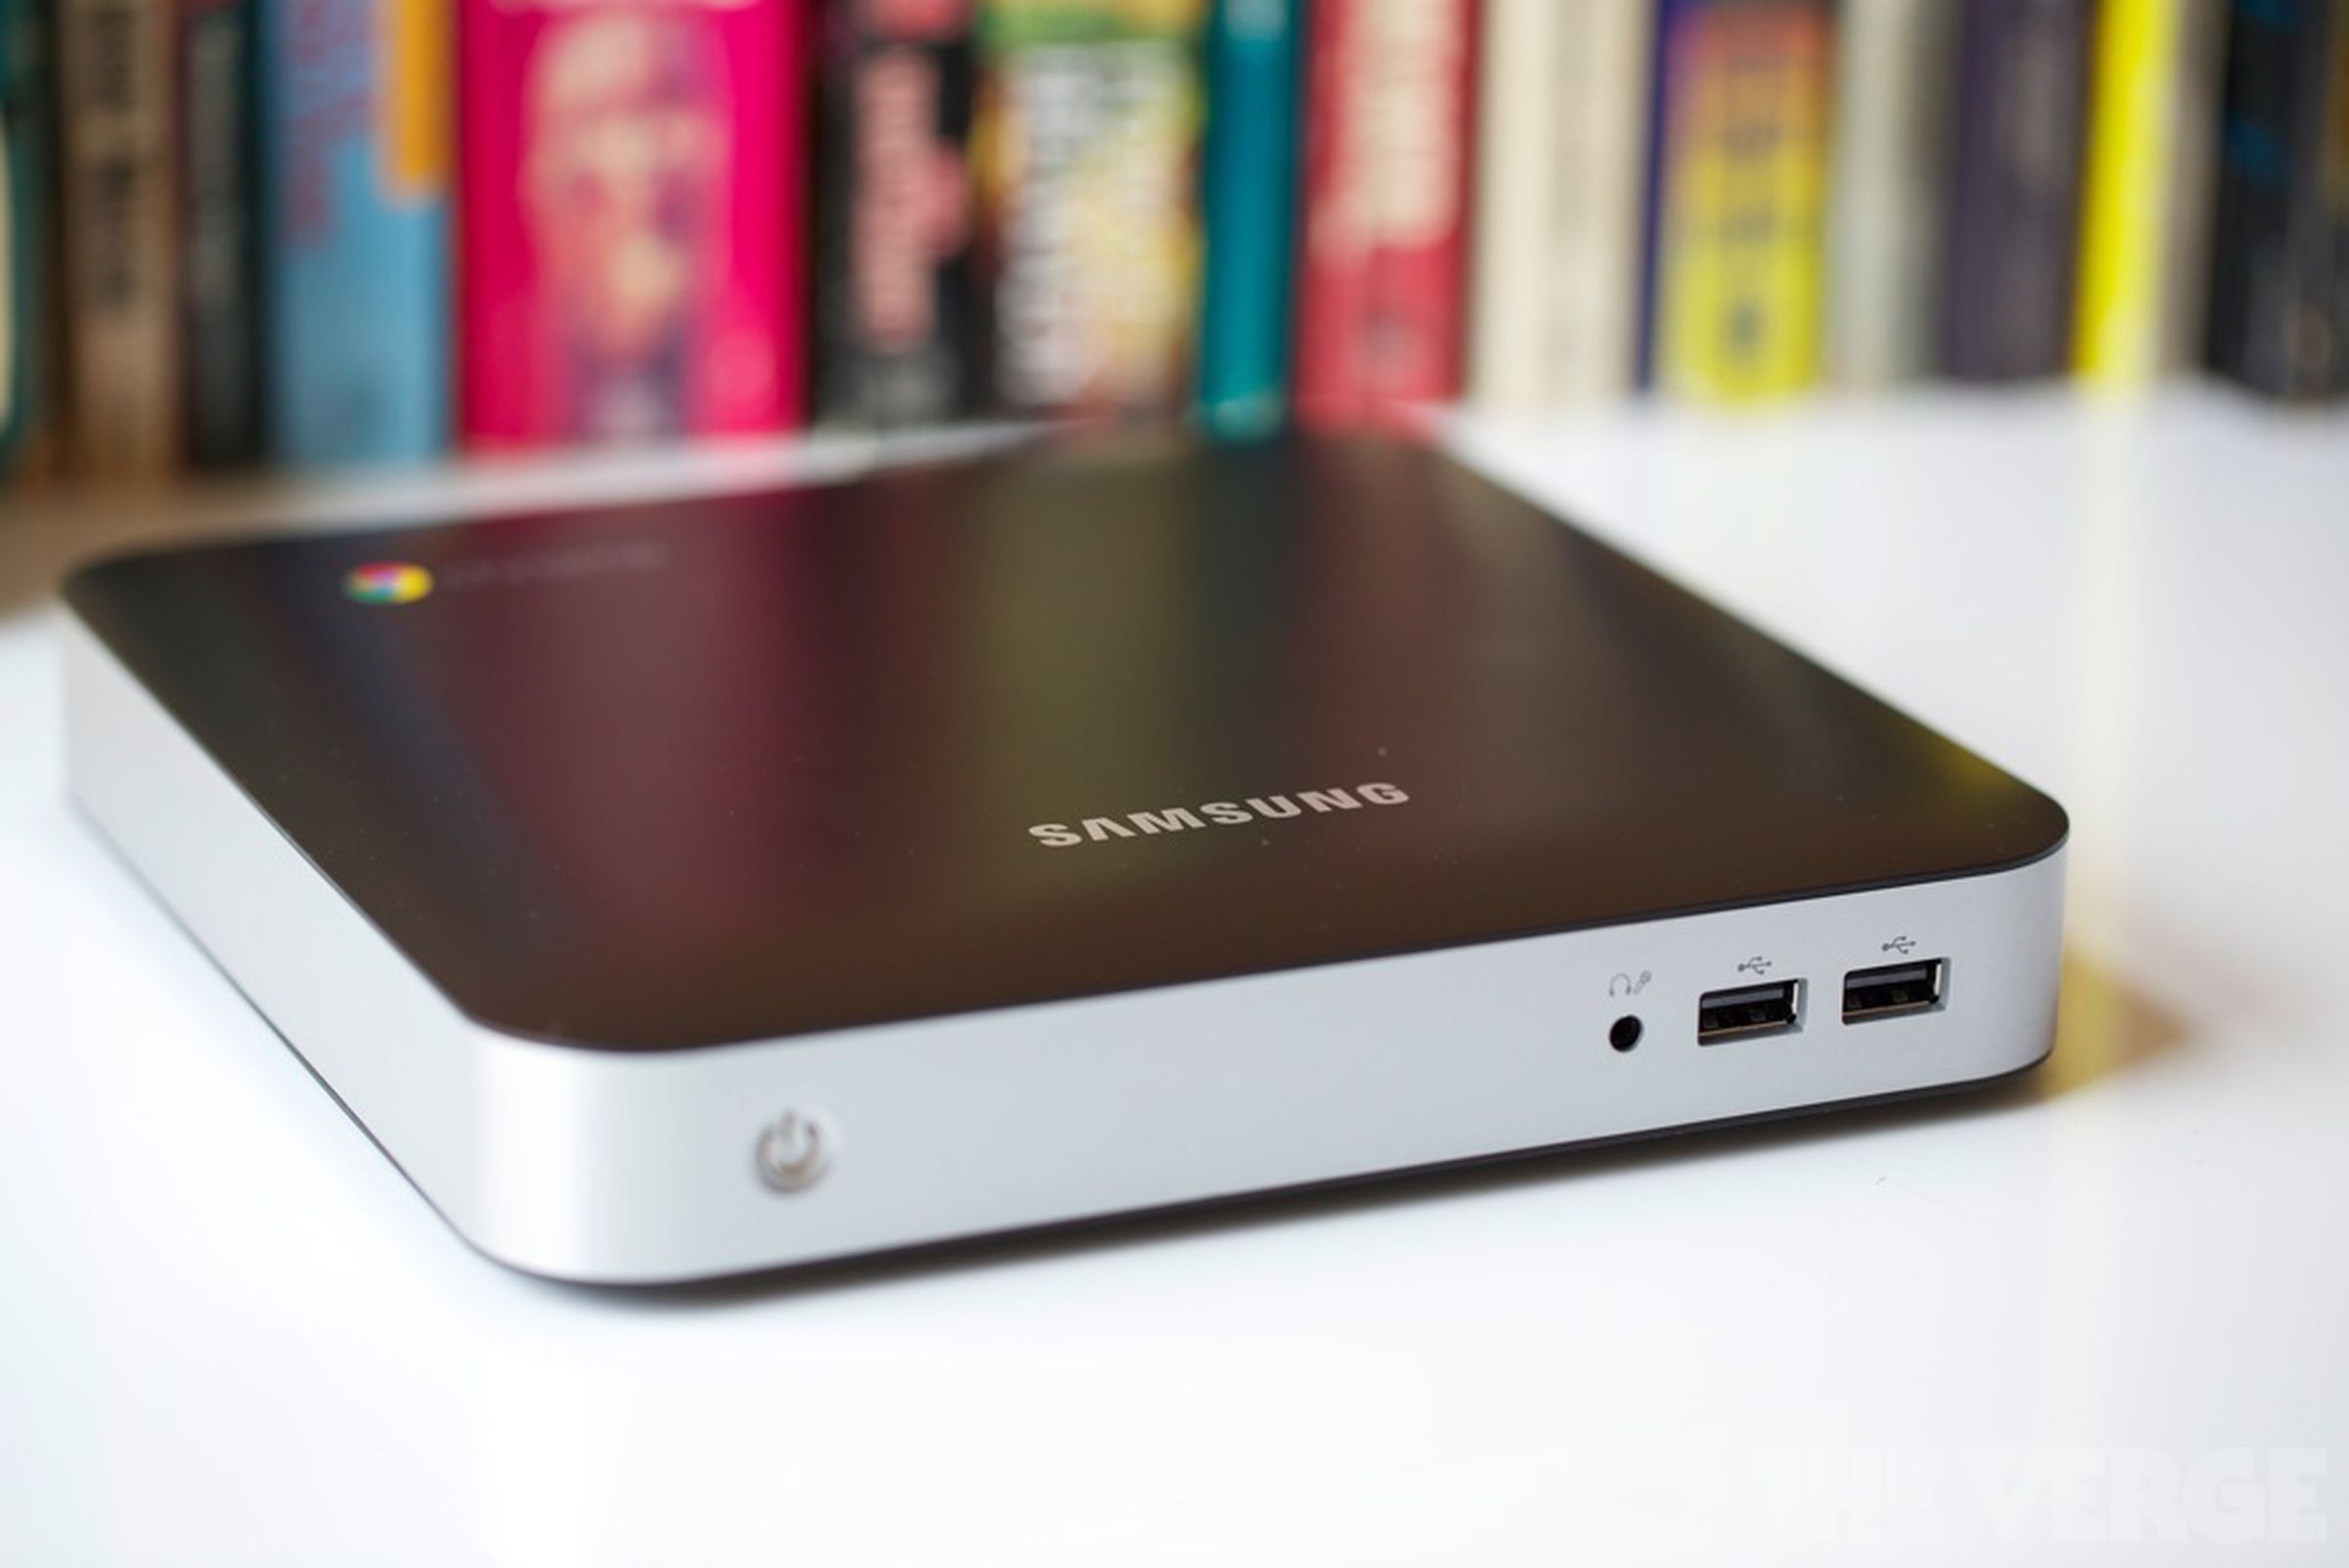 Samsung Series 5 Chromebook and Series 3 Chromebox review pictures